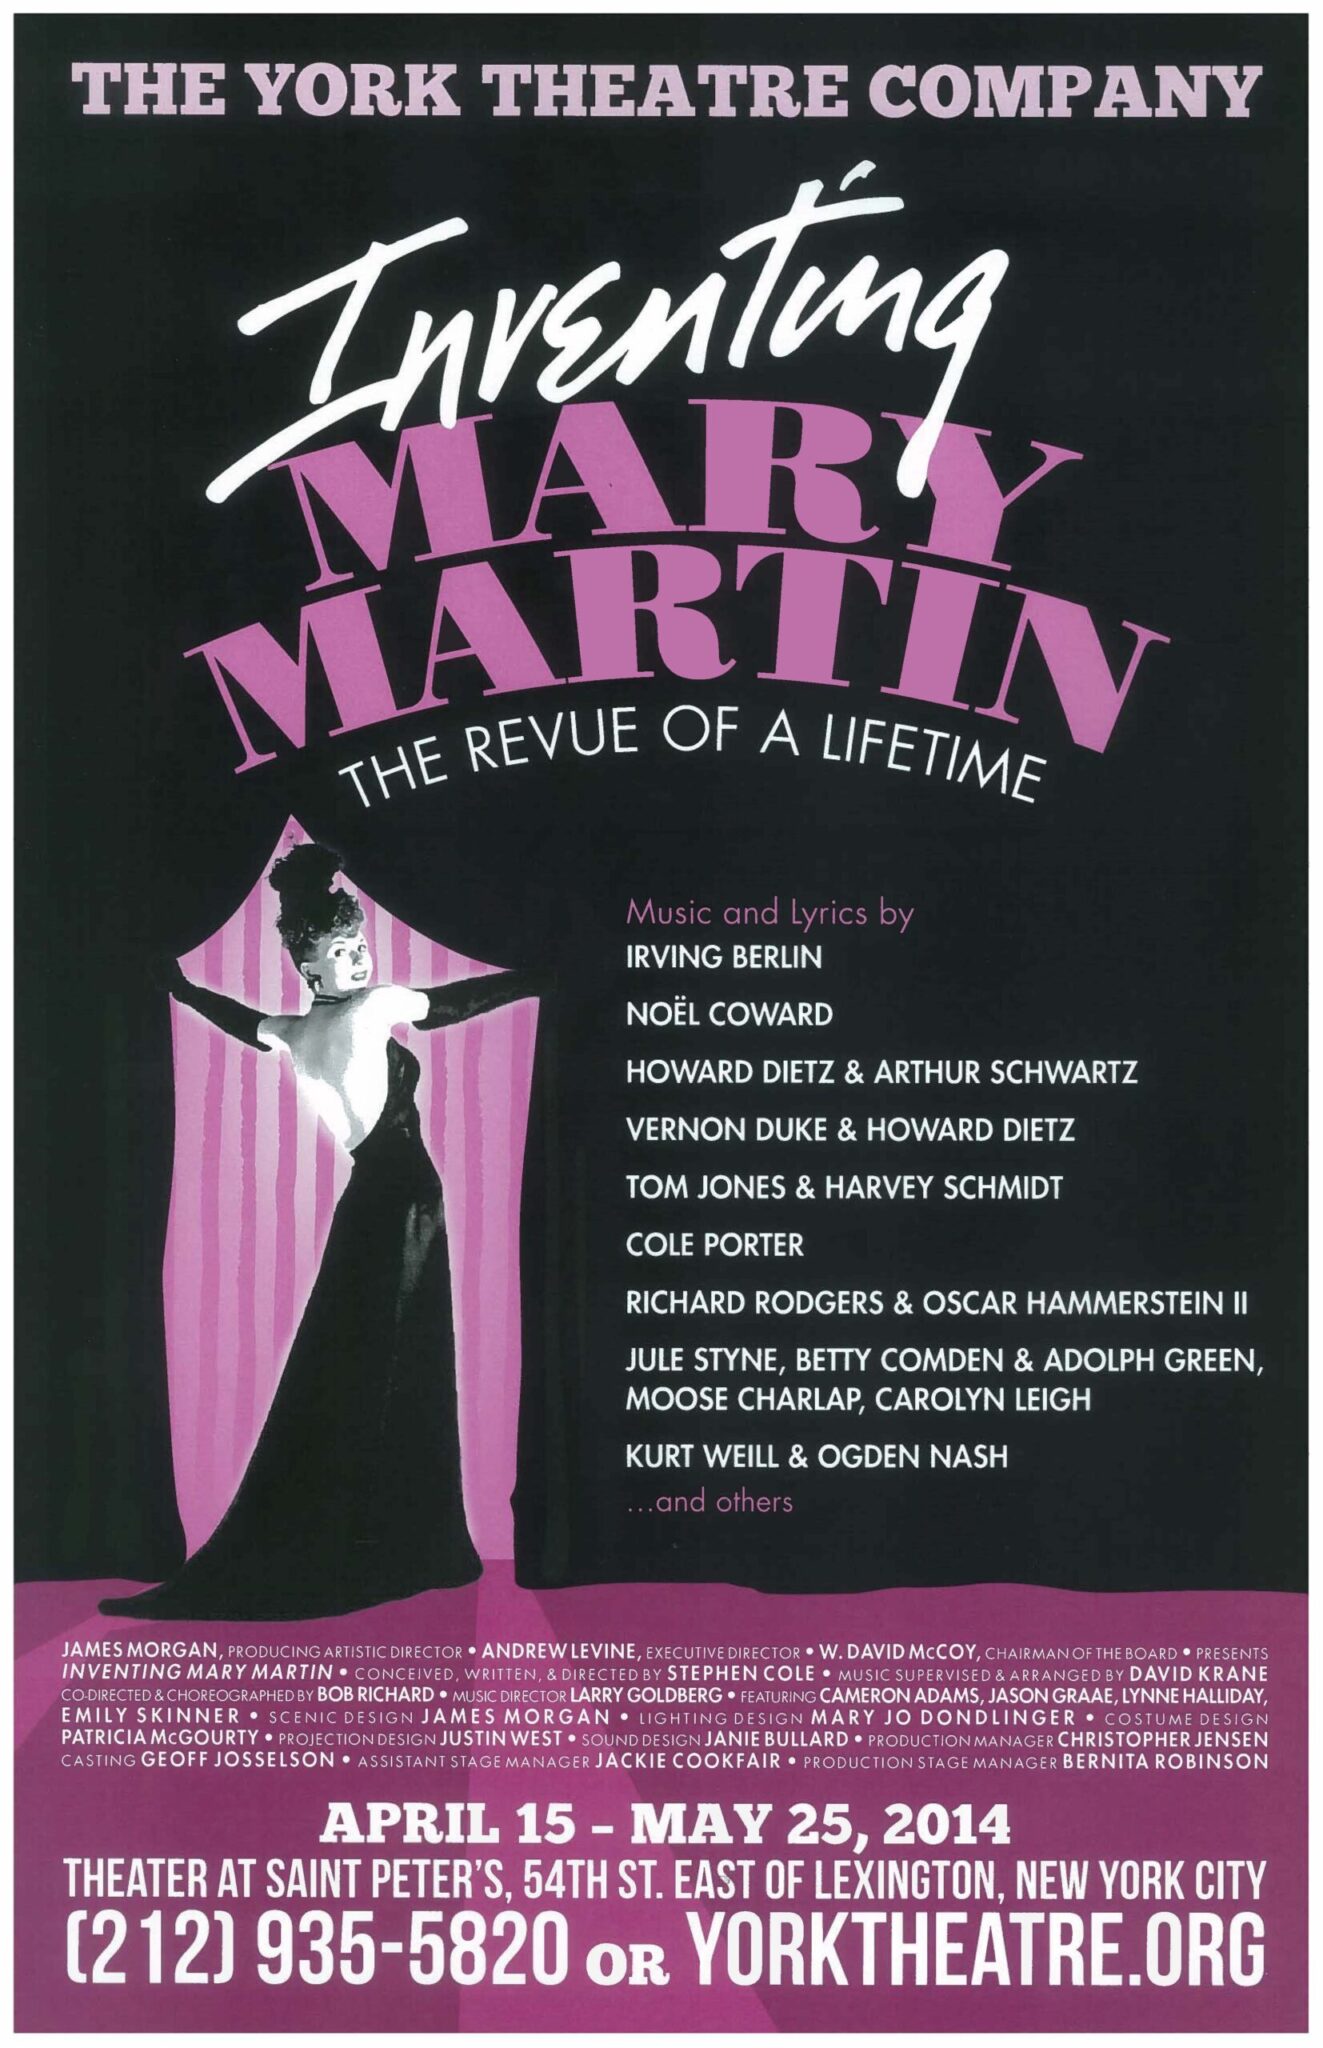 Inventing Mary Martin Poster NEW